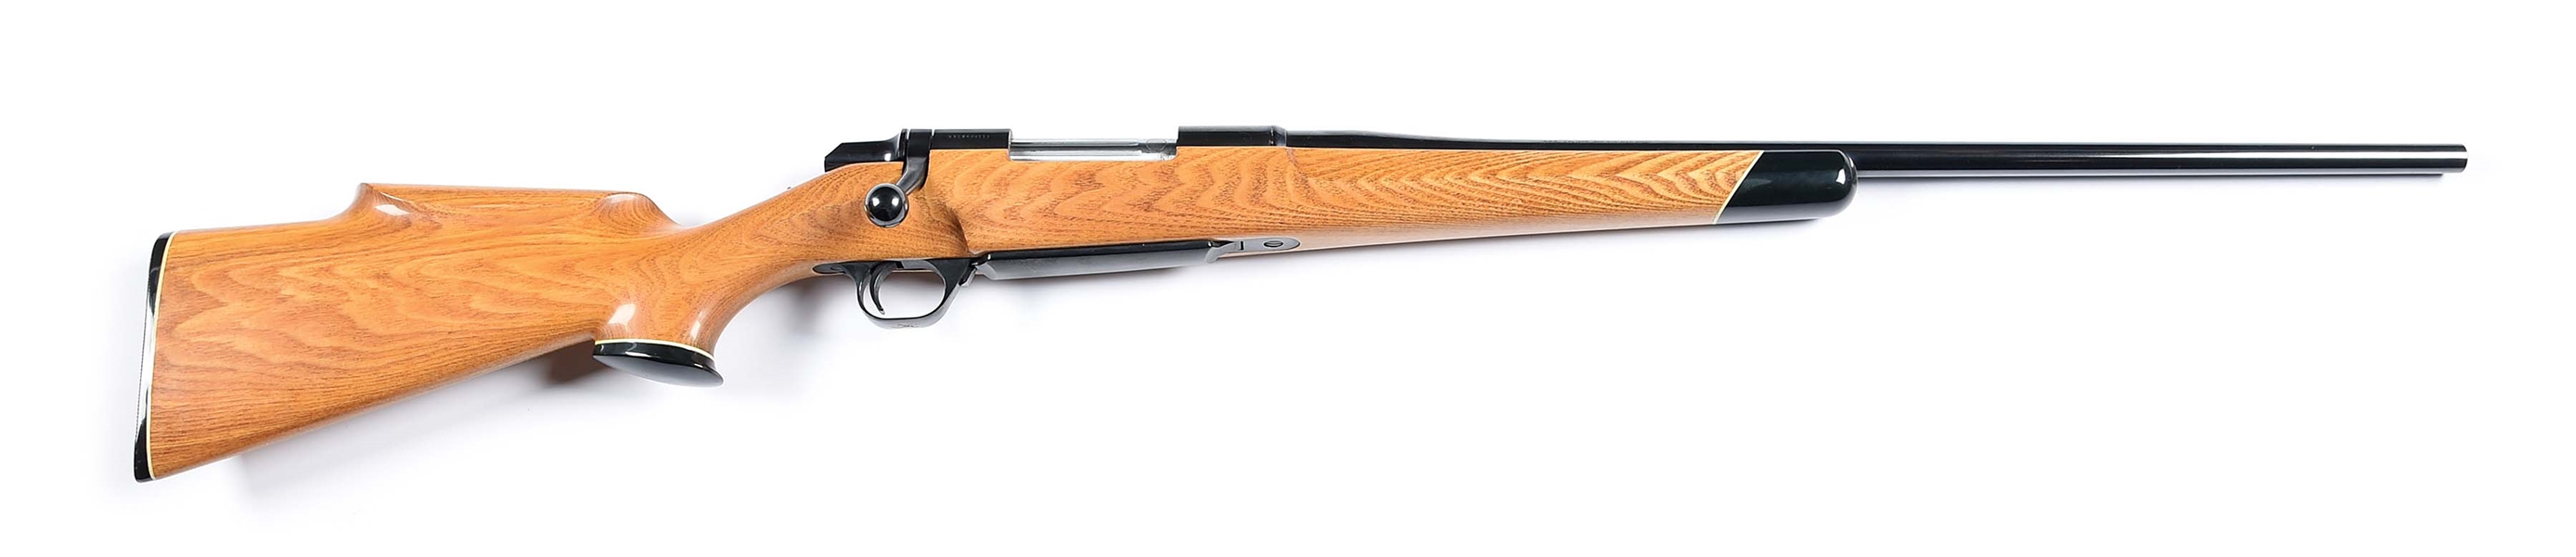 (M) BROWNING BBR BOLT ACTION RIFLE WITH ASH (JAPANESE) / FRAXINUS SIEBOLDIANA STOCK.